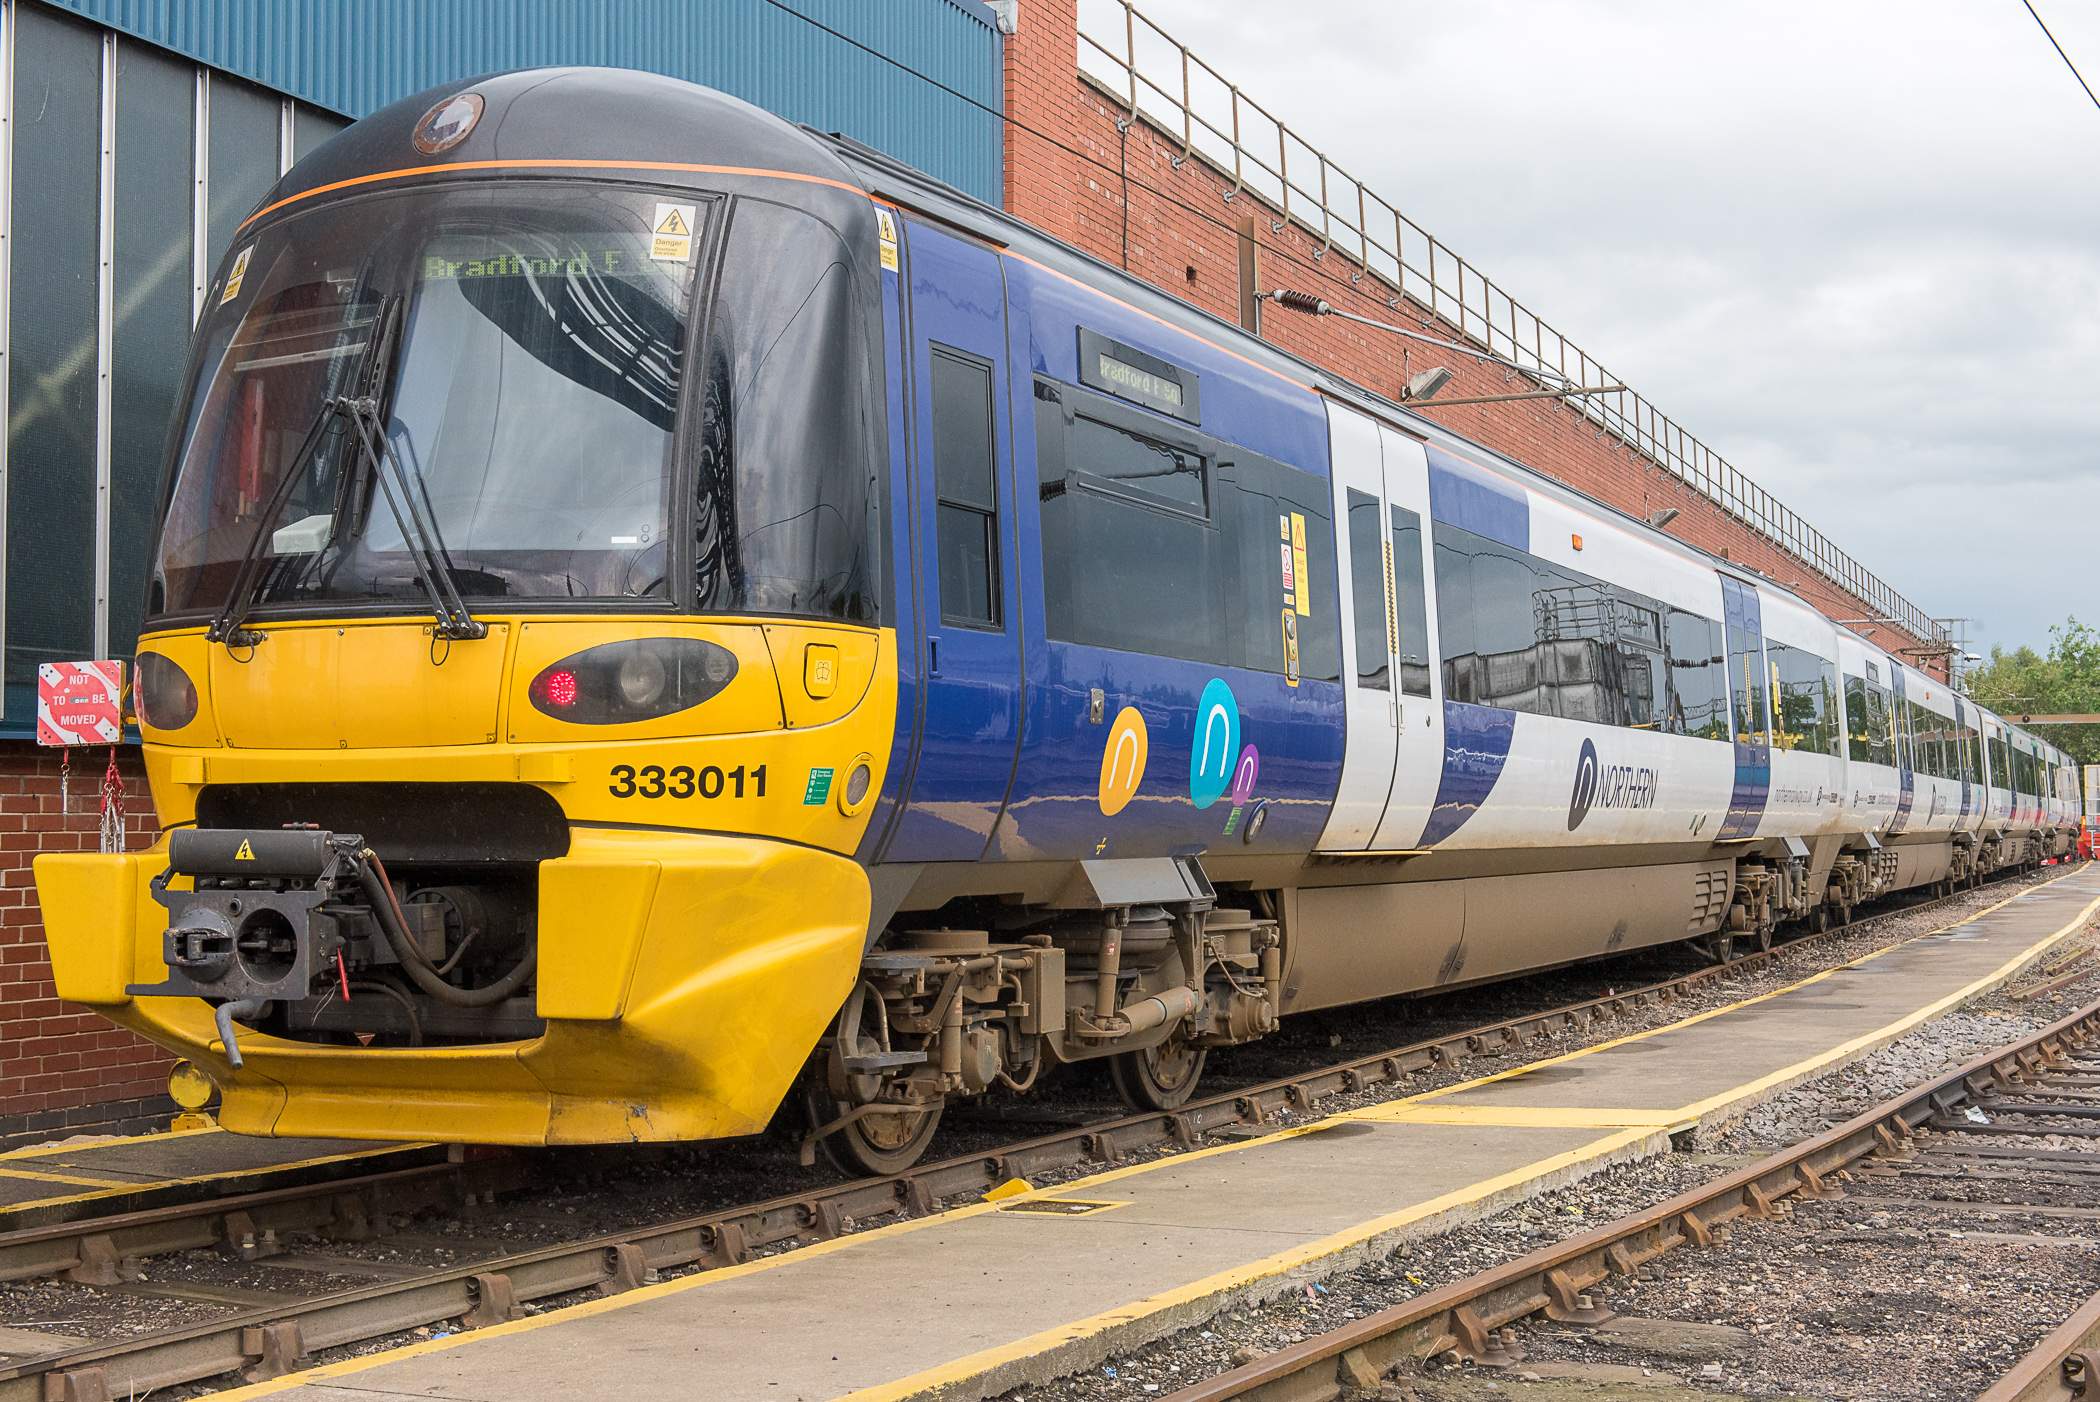 The Northern class 333 train